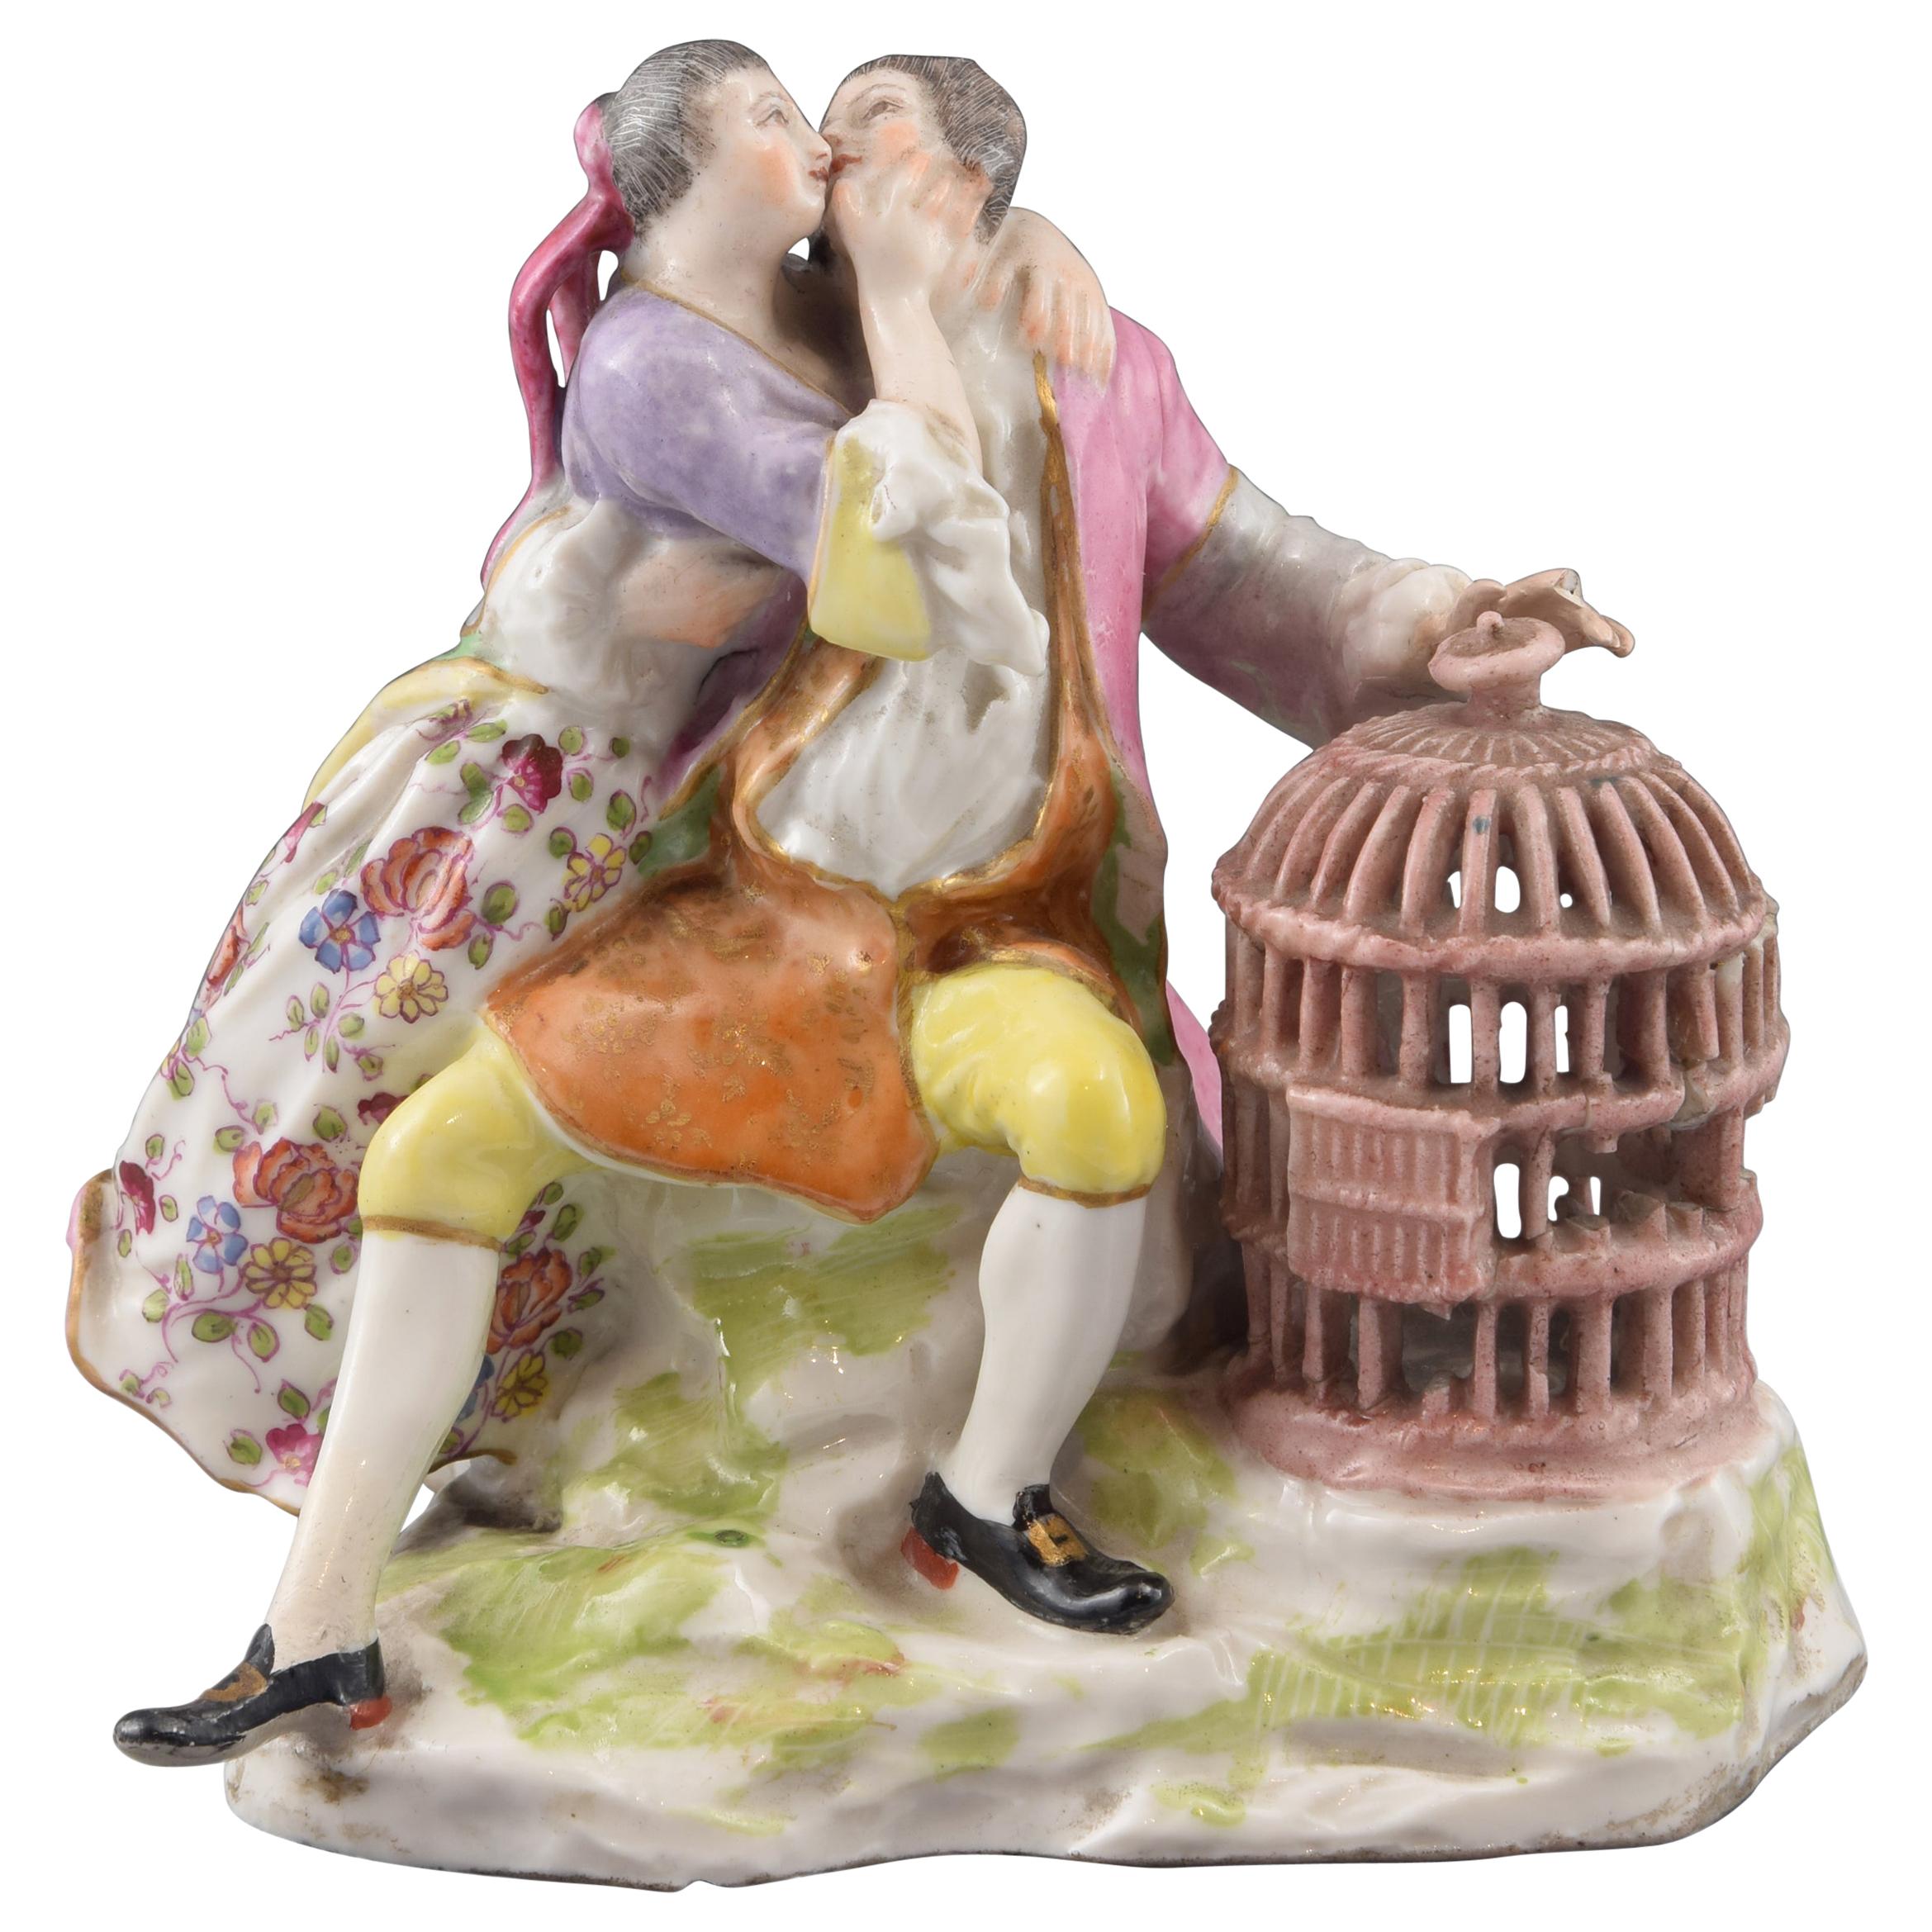 Lovers and Cage, Glazed Porcelain, After Meissen Models, circa 1800